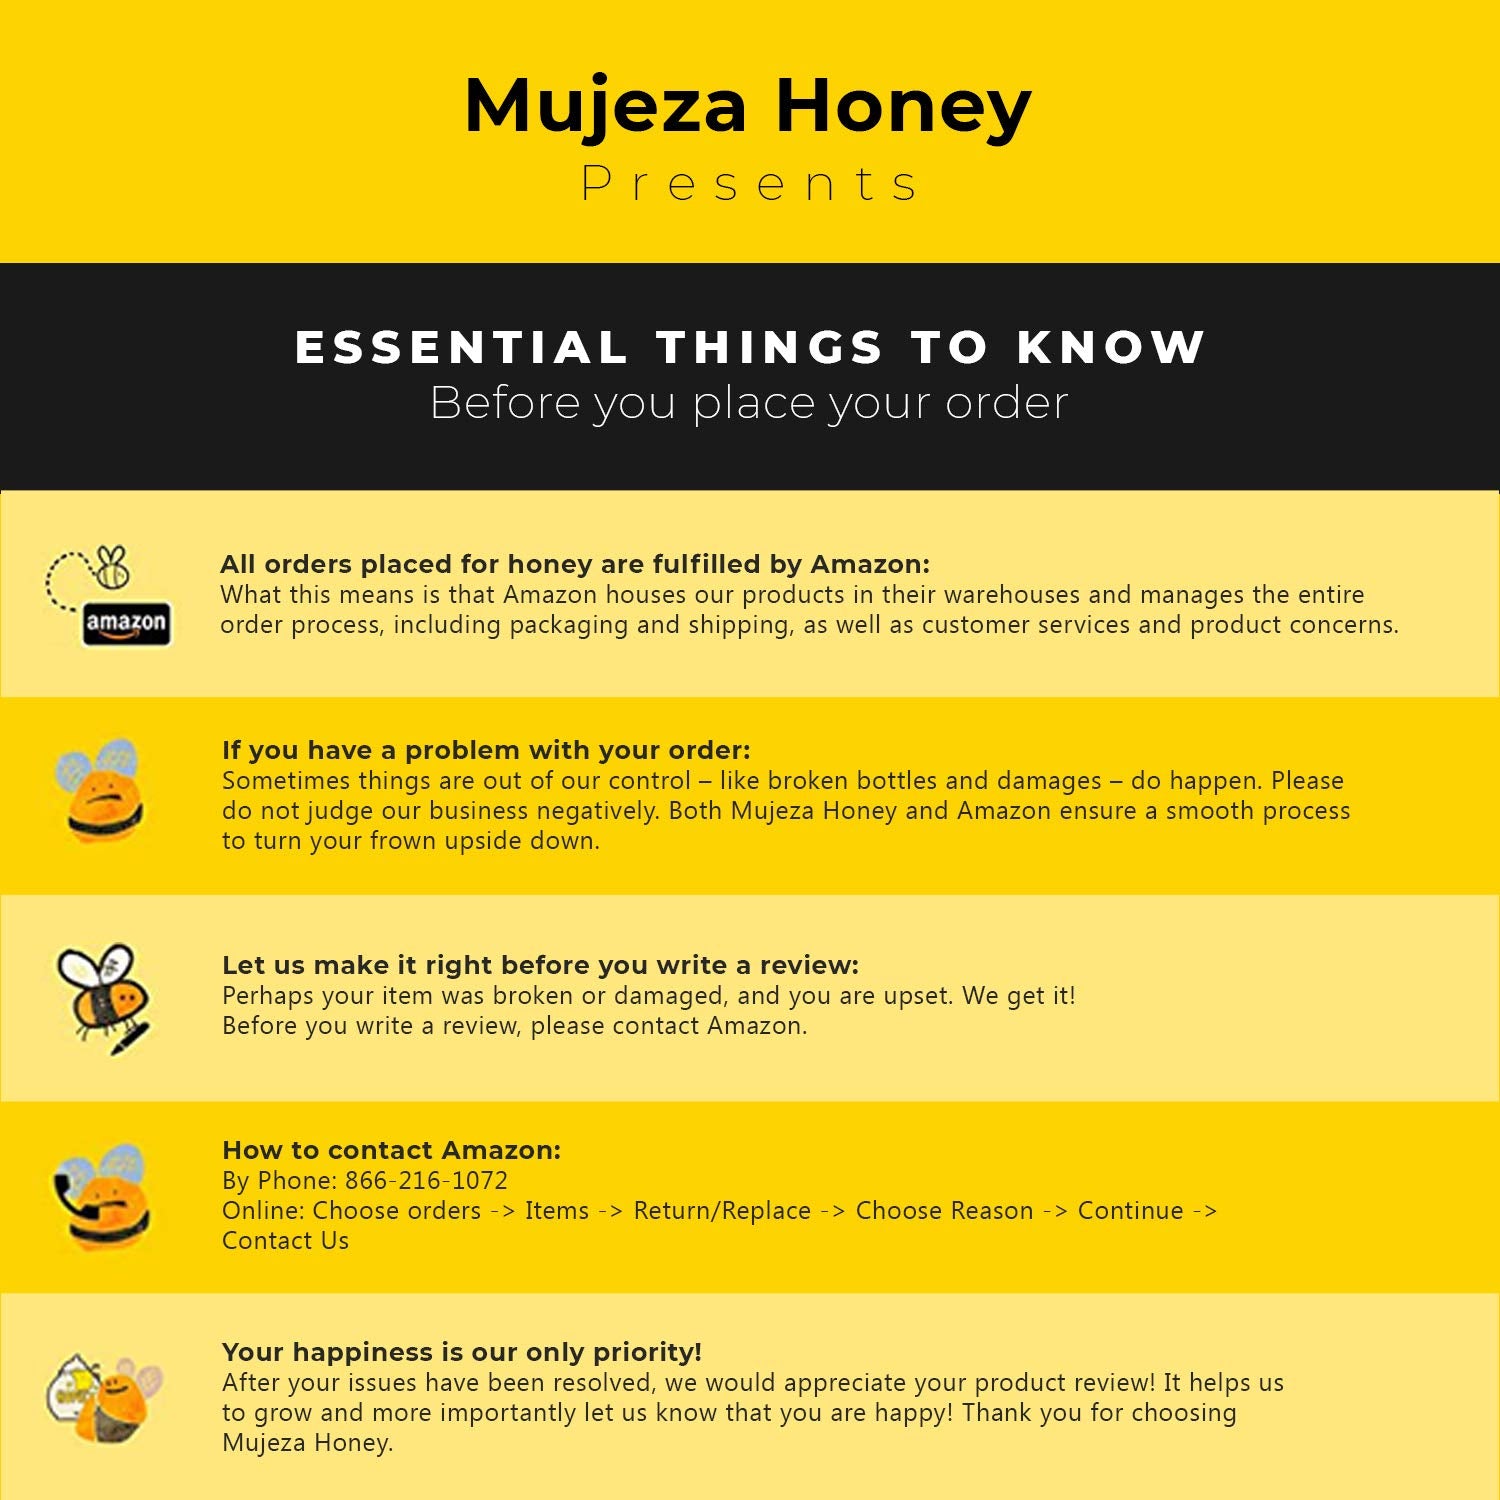 Mujeza Honey - essential things to know about honey - before placing your order